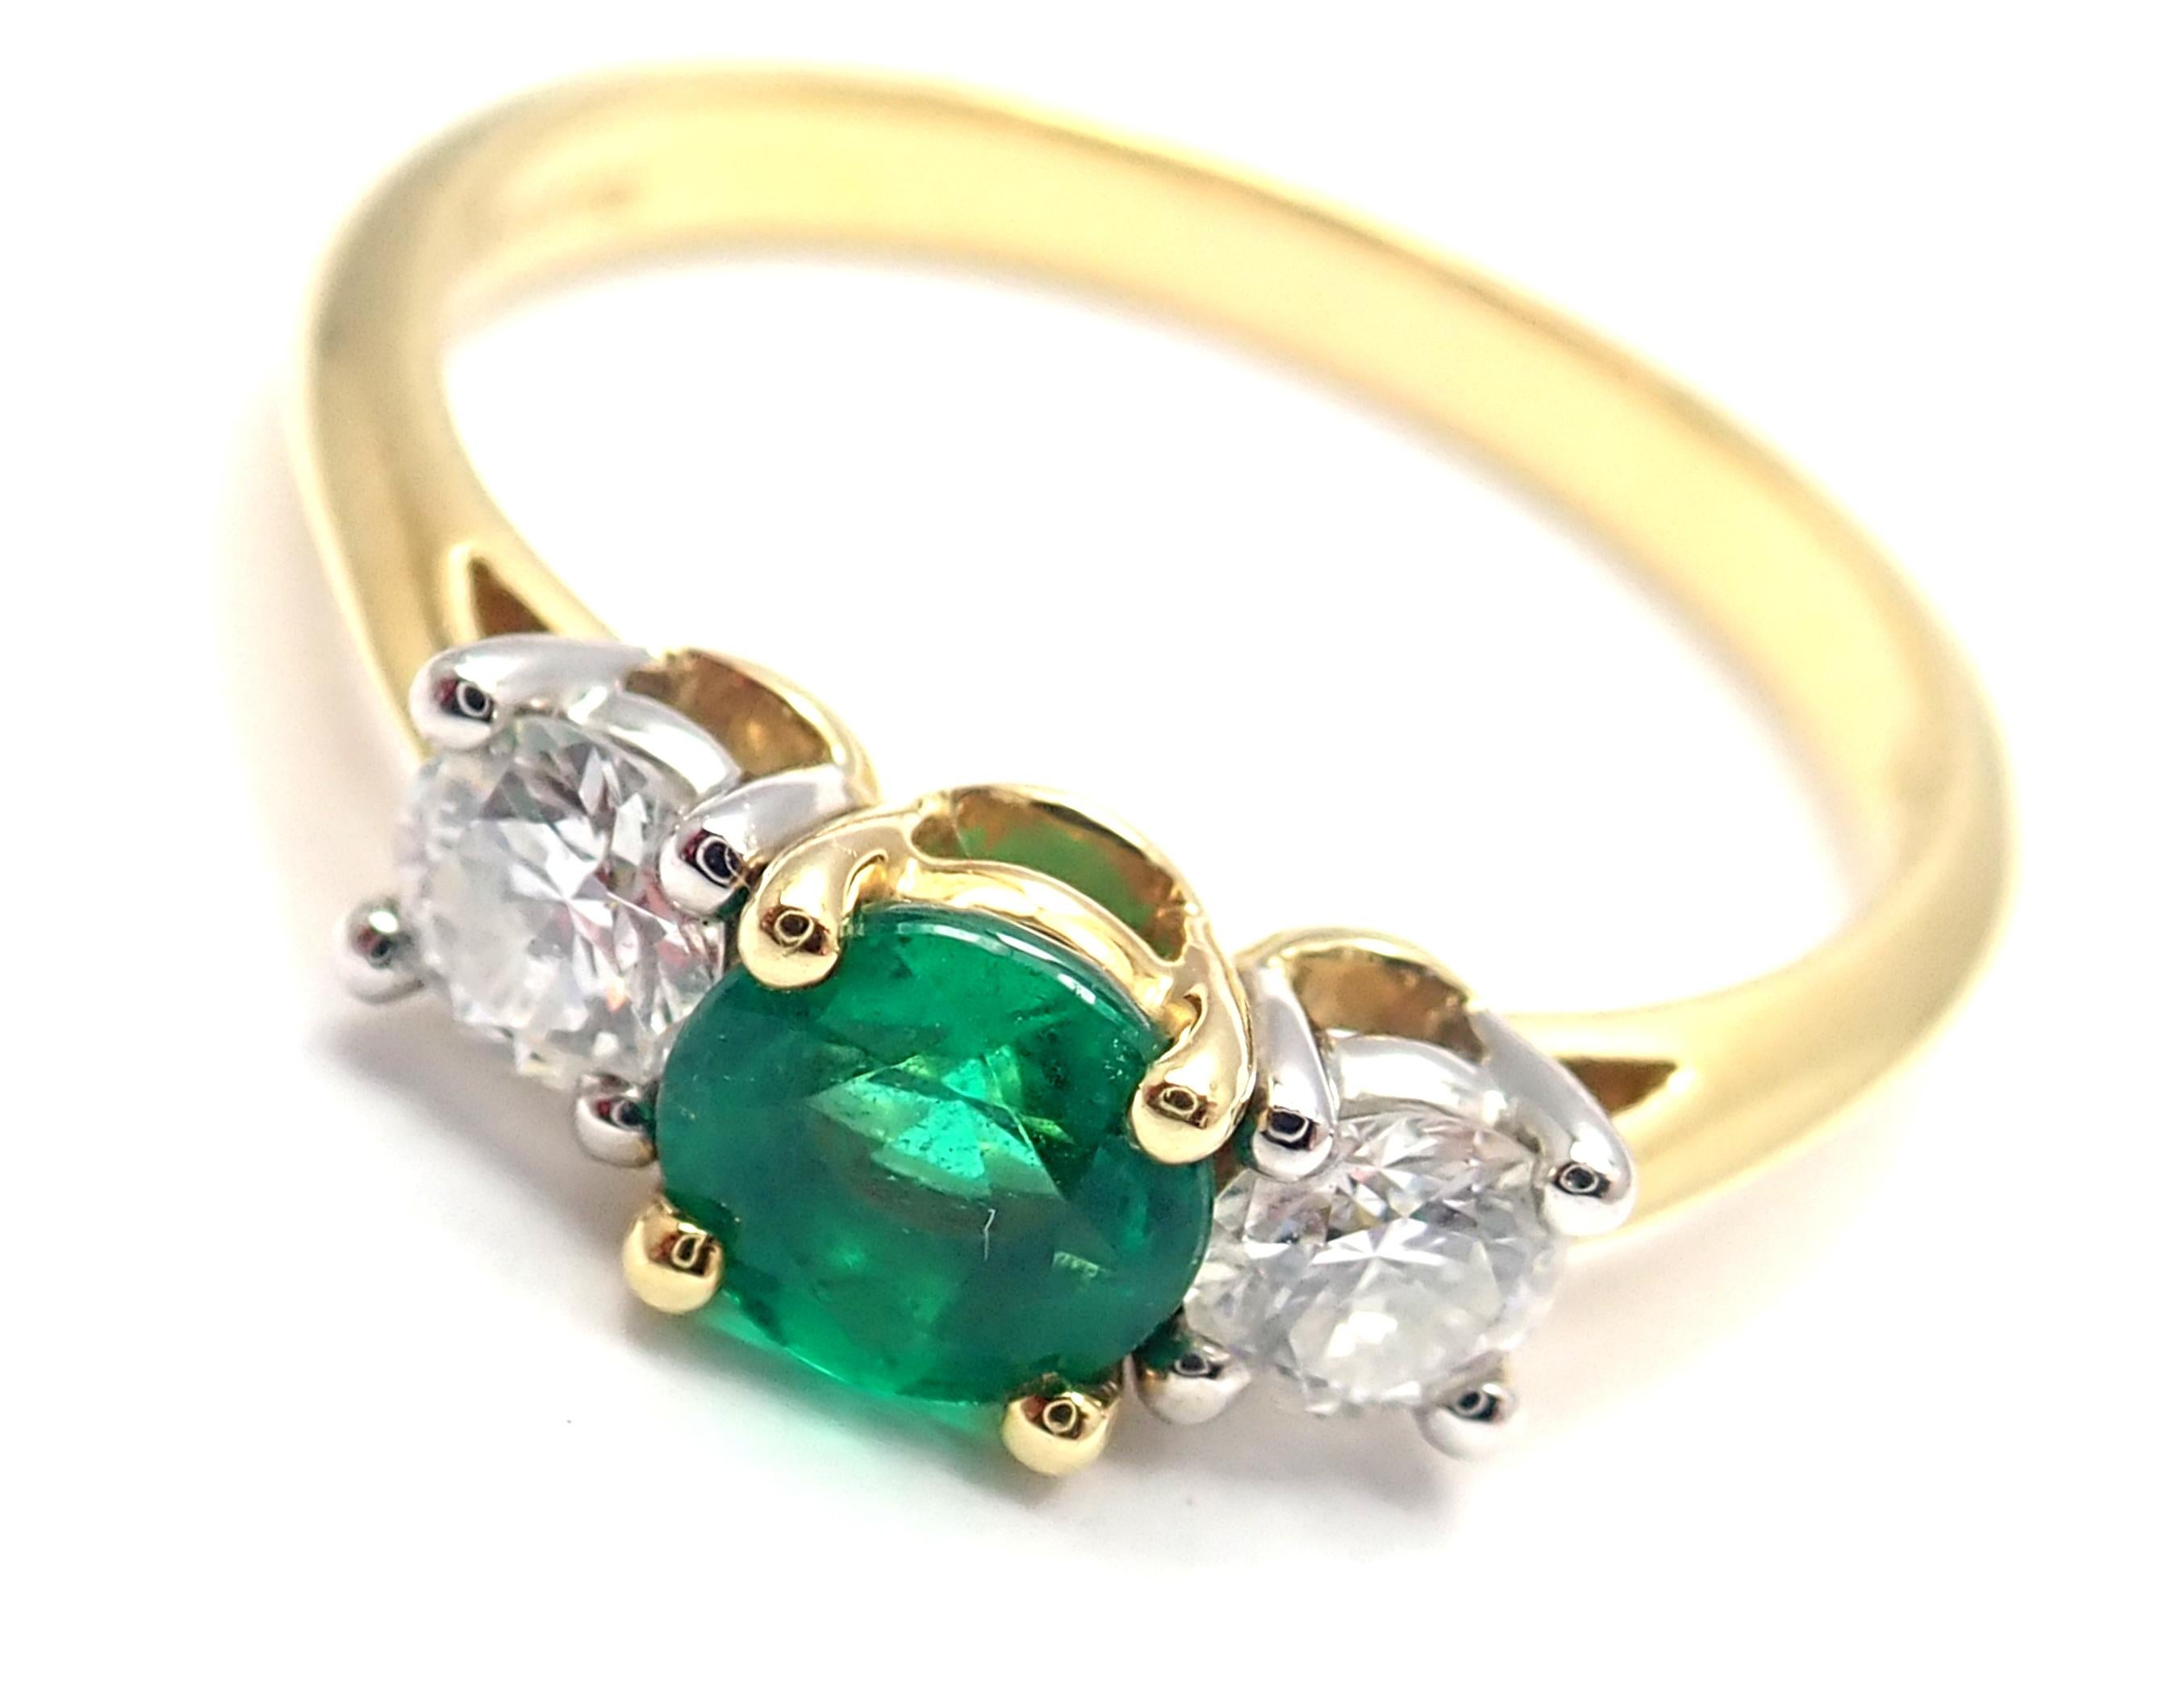 18k Yellow Gold And Platinum Diamond Emerald Three Stone Band Ring.
With 2 round brilliant cut diamonds VS1 clarity, G color total weight approx. .36ct
1 round emerald total weight approx. .50ct
Measurements:
Ring Size: 7
Weight:  3.4 grams
Width at